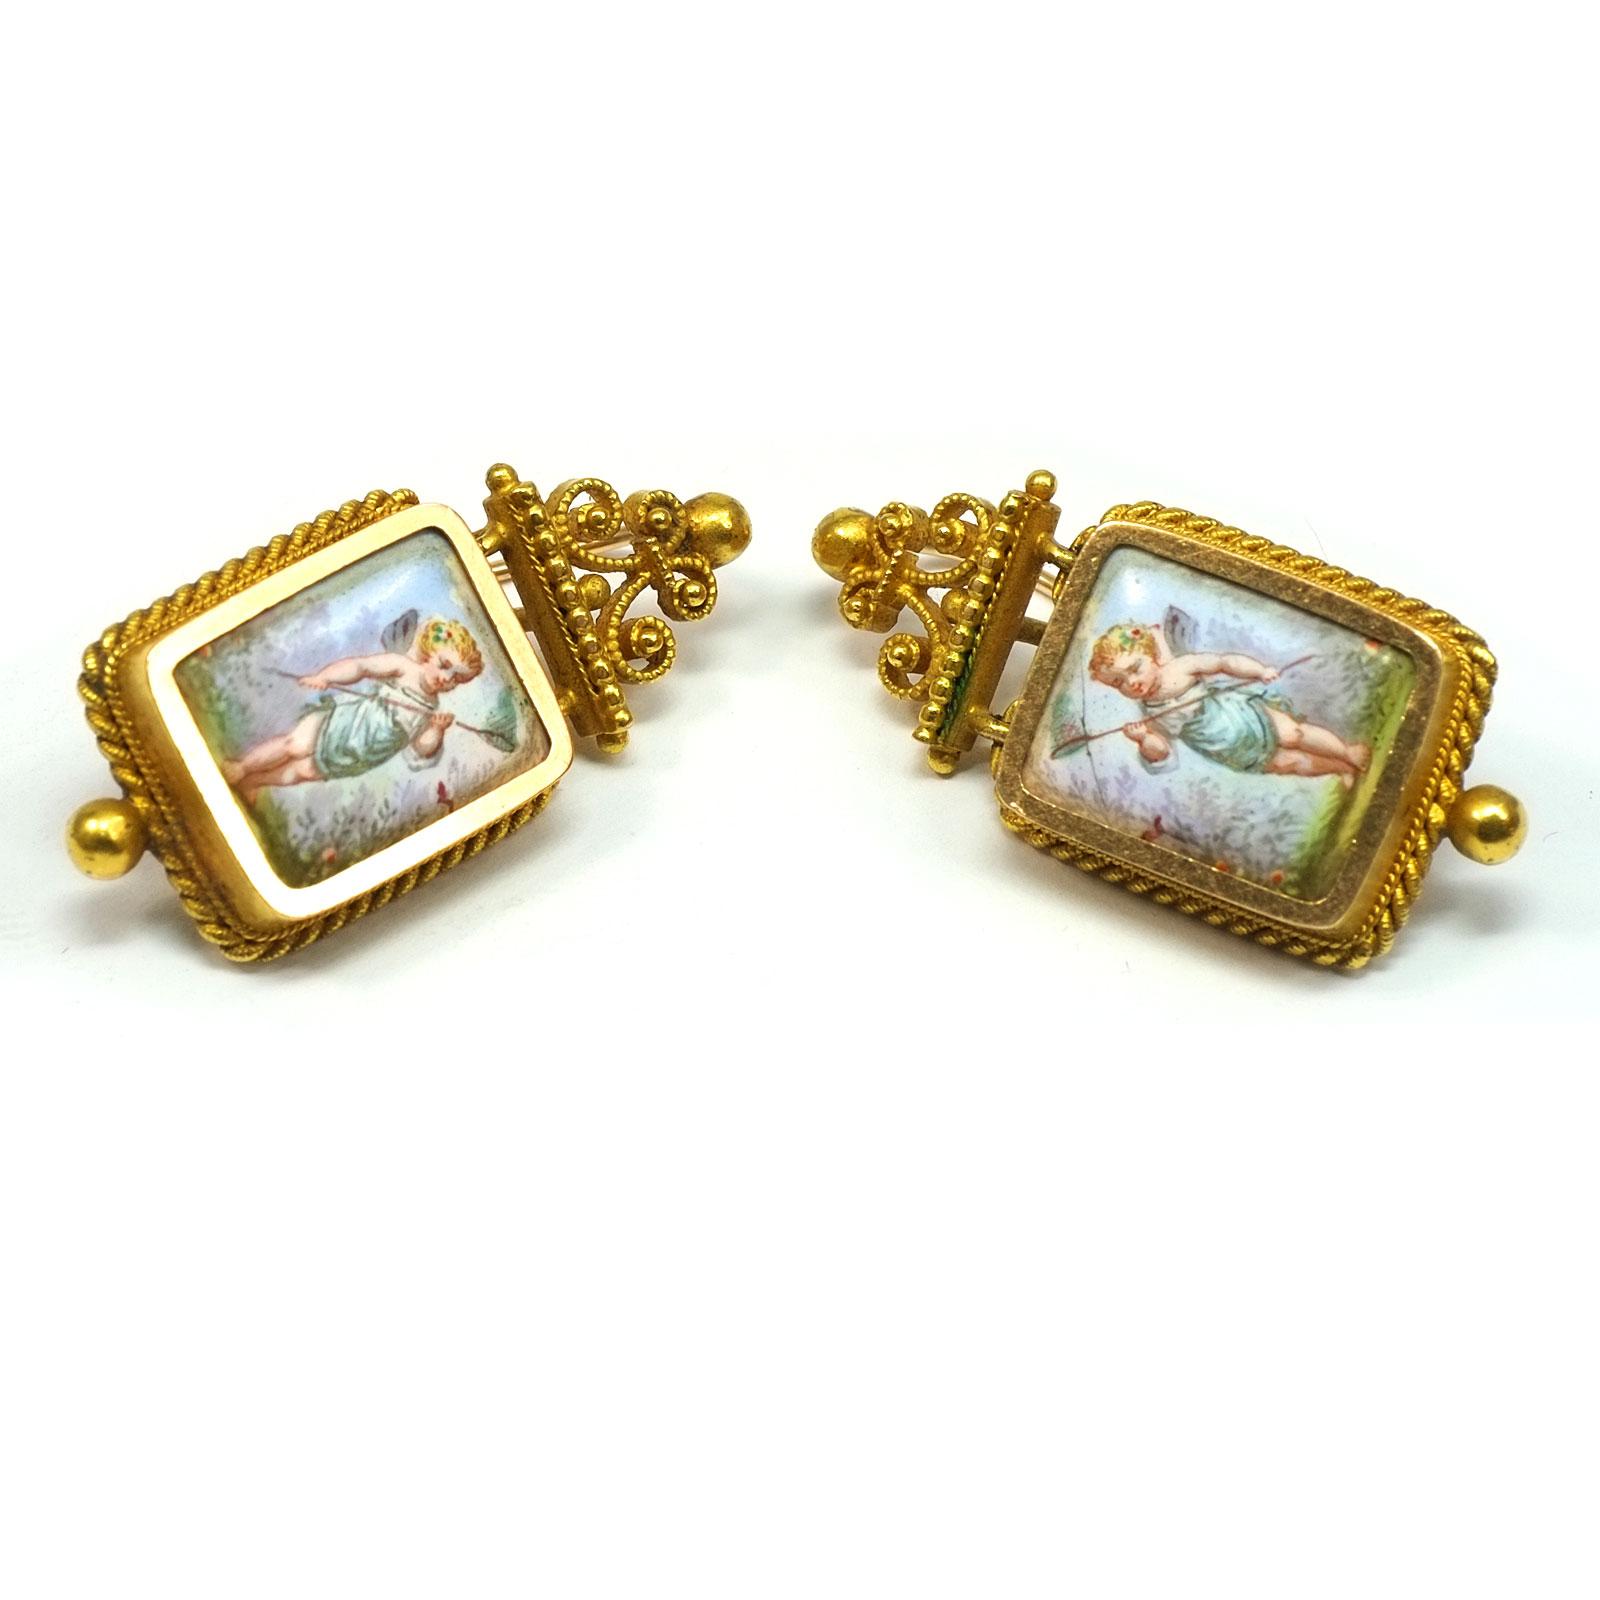 Swiss Gold Demi Parure Earrings and Brooch with Miniature Painting, circa 1870 3